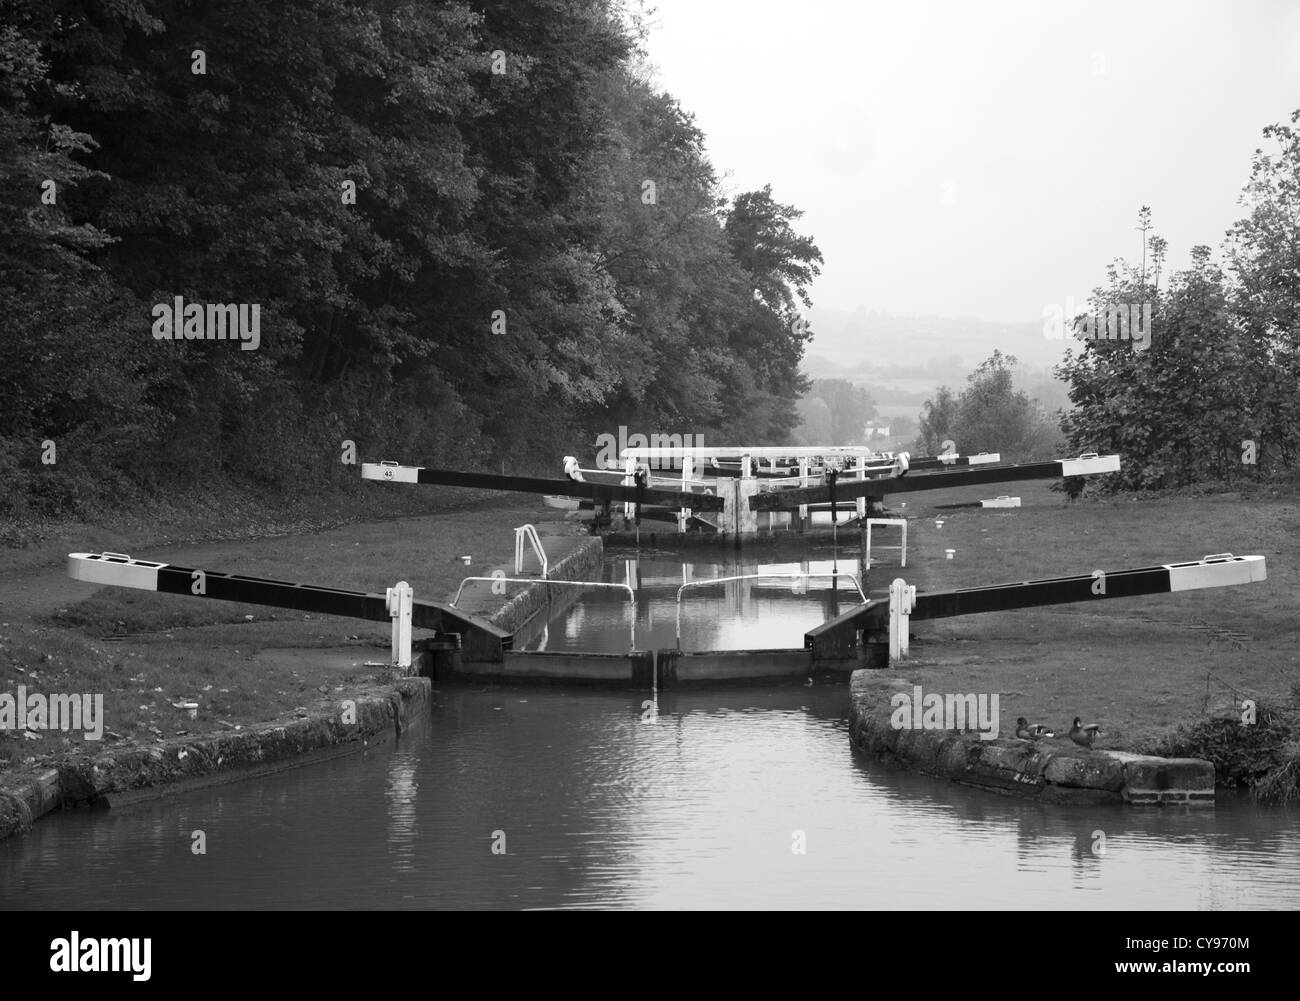 Locks canal Black and White Stock Photos & Images - Alamy